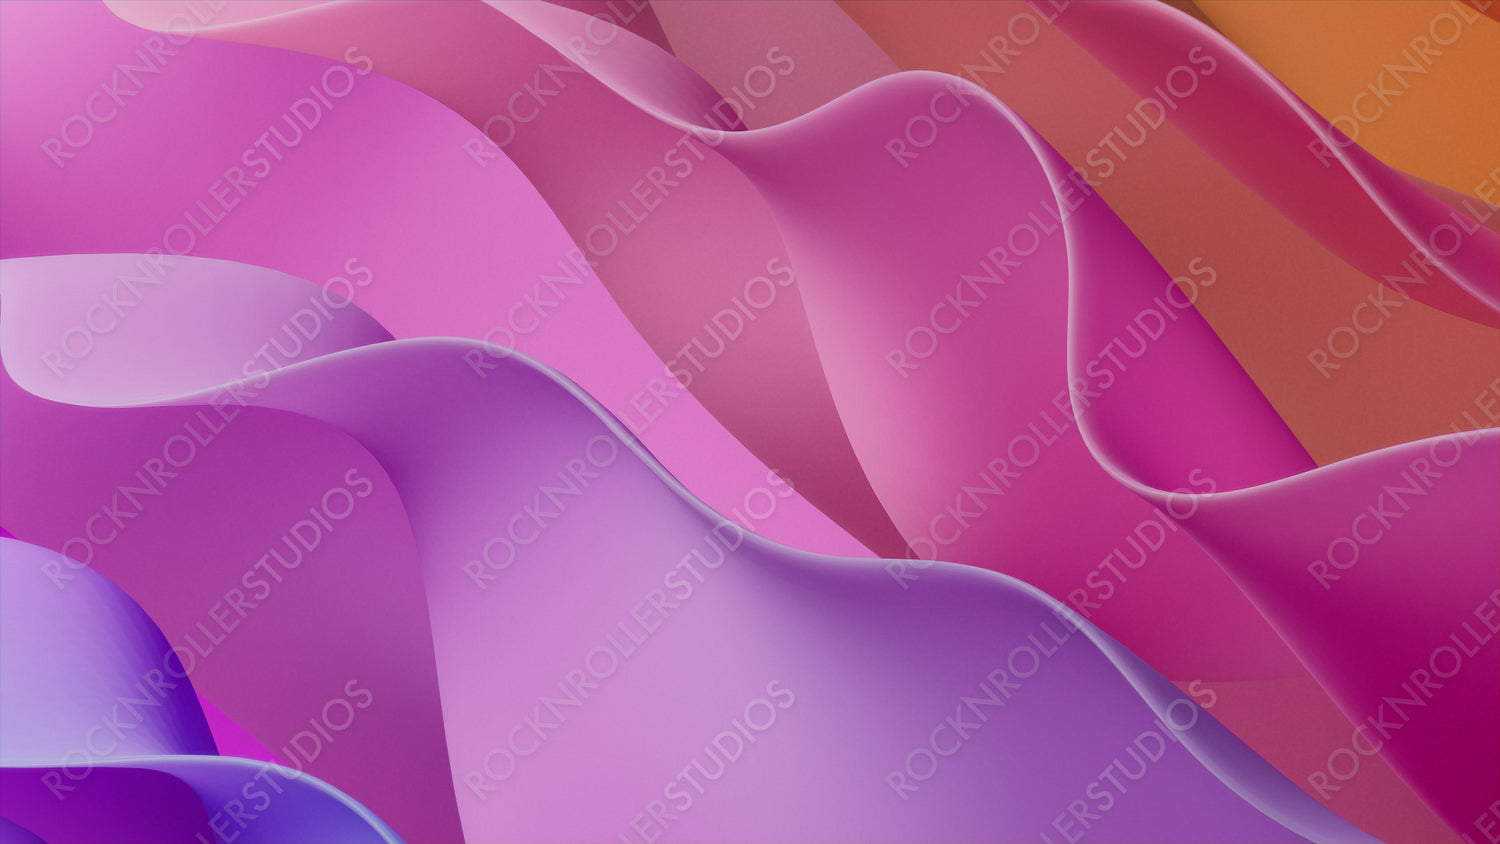 Contemporary 3D Design Background, with Ripple, Abstract Pink and Violet Surfaces. 3D Render.